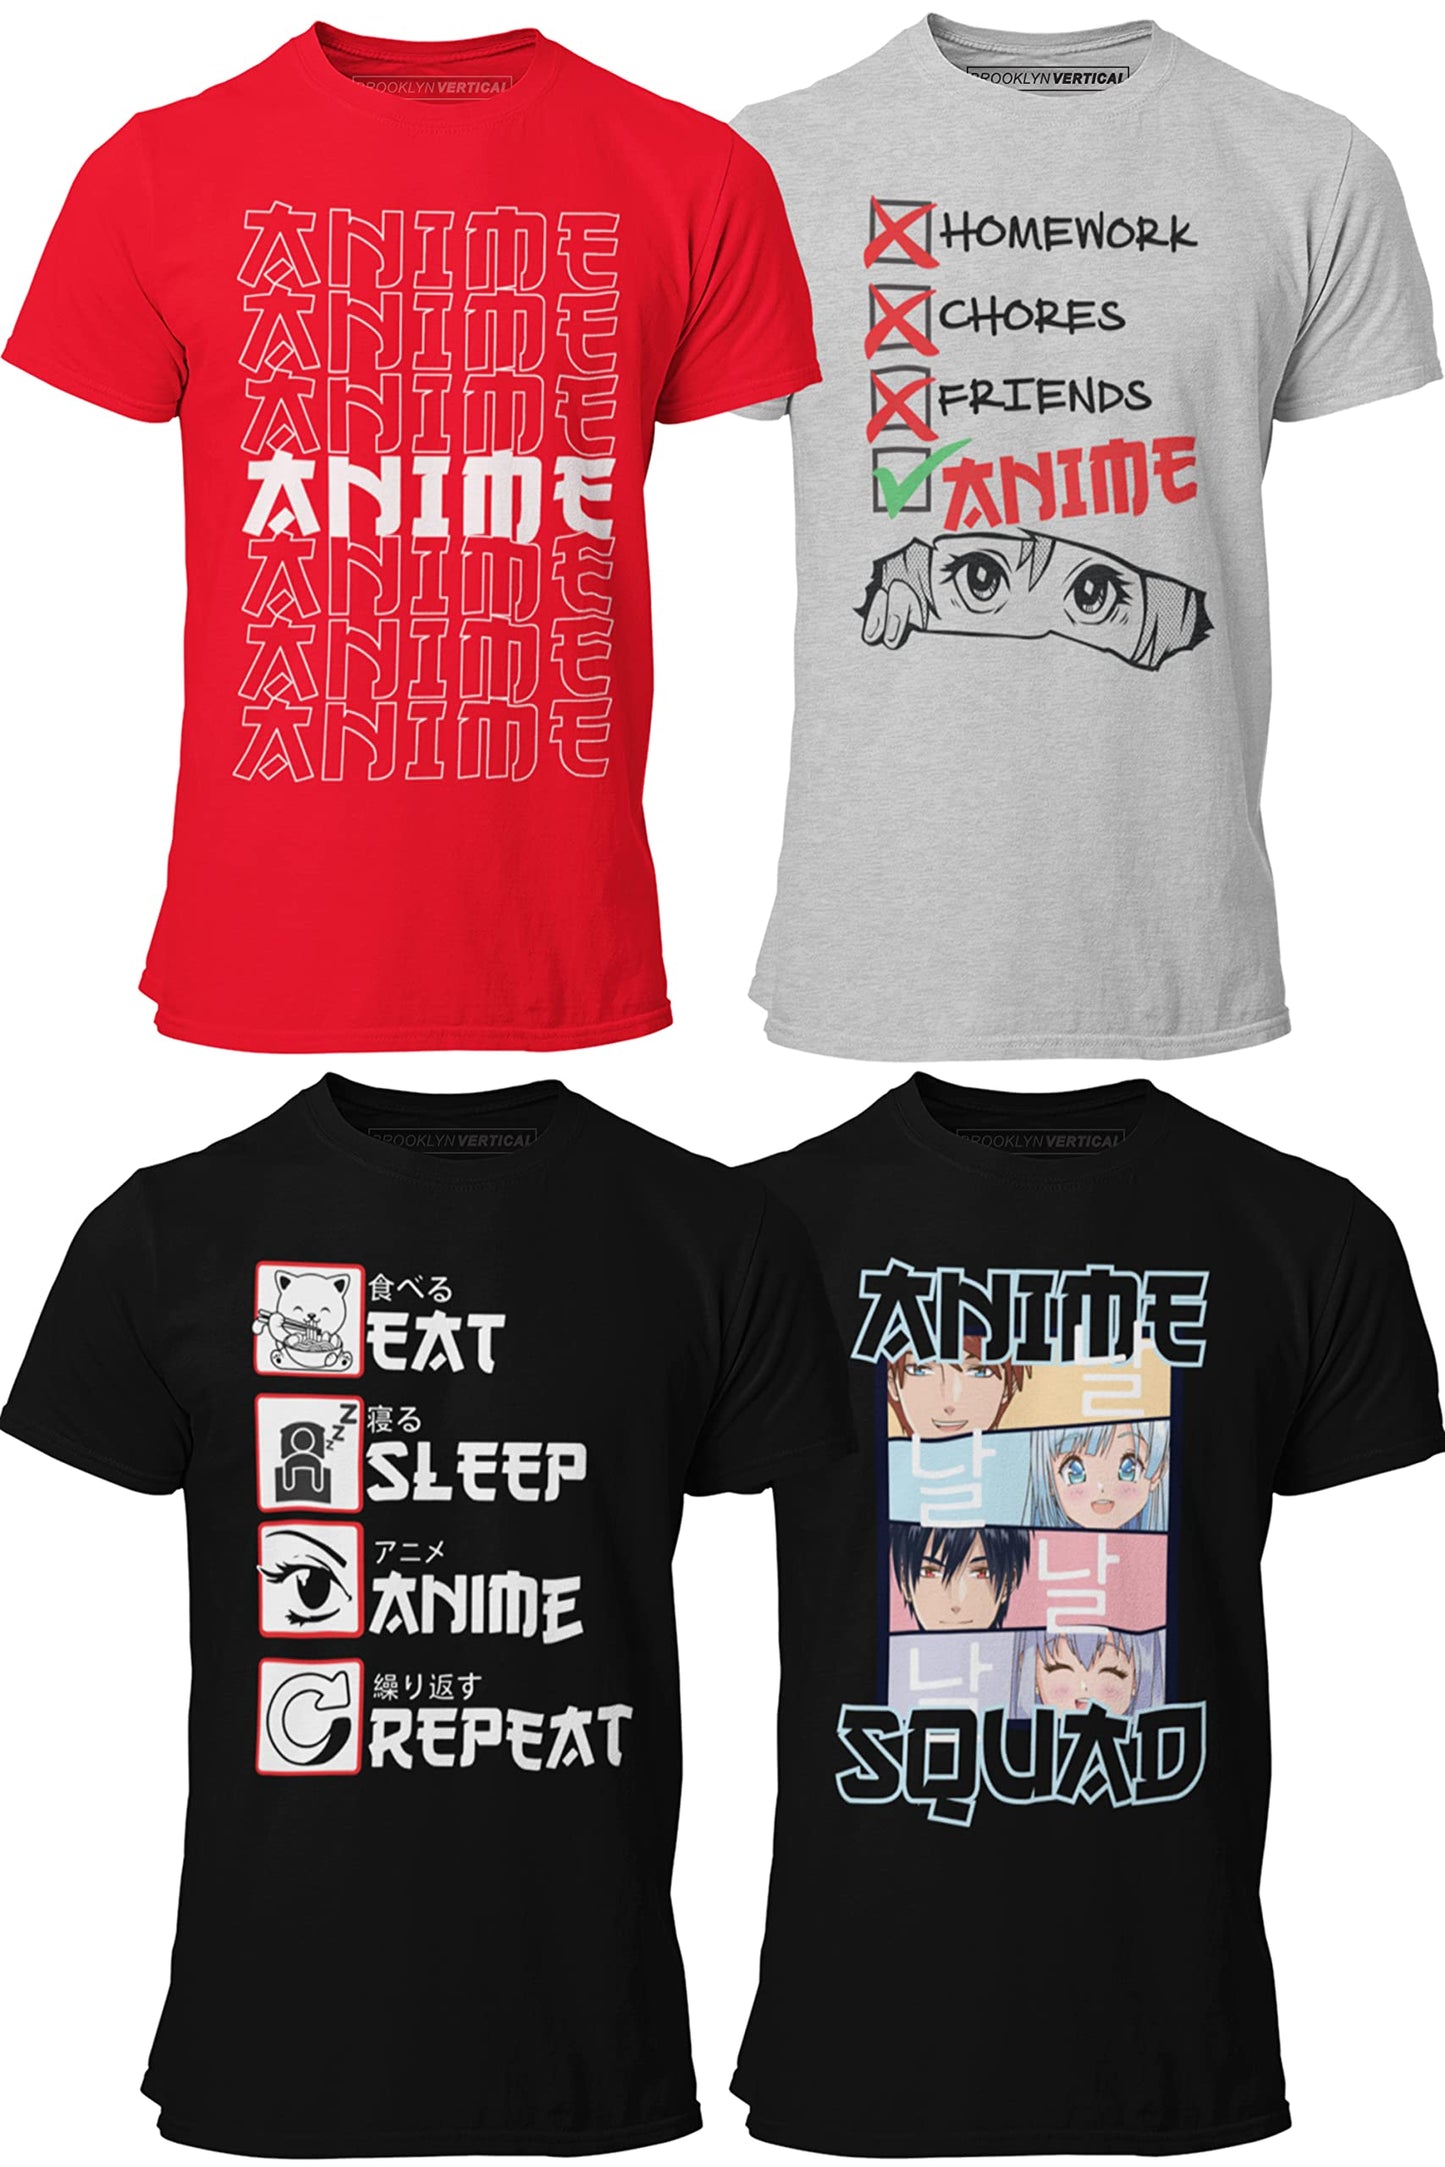 4-Pack Anime Japanese Art Short Sleeve Printed T-Shirts for Boys and Girls Ages 6 to 20| Size S-XL